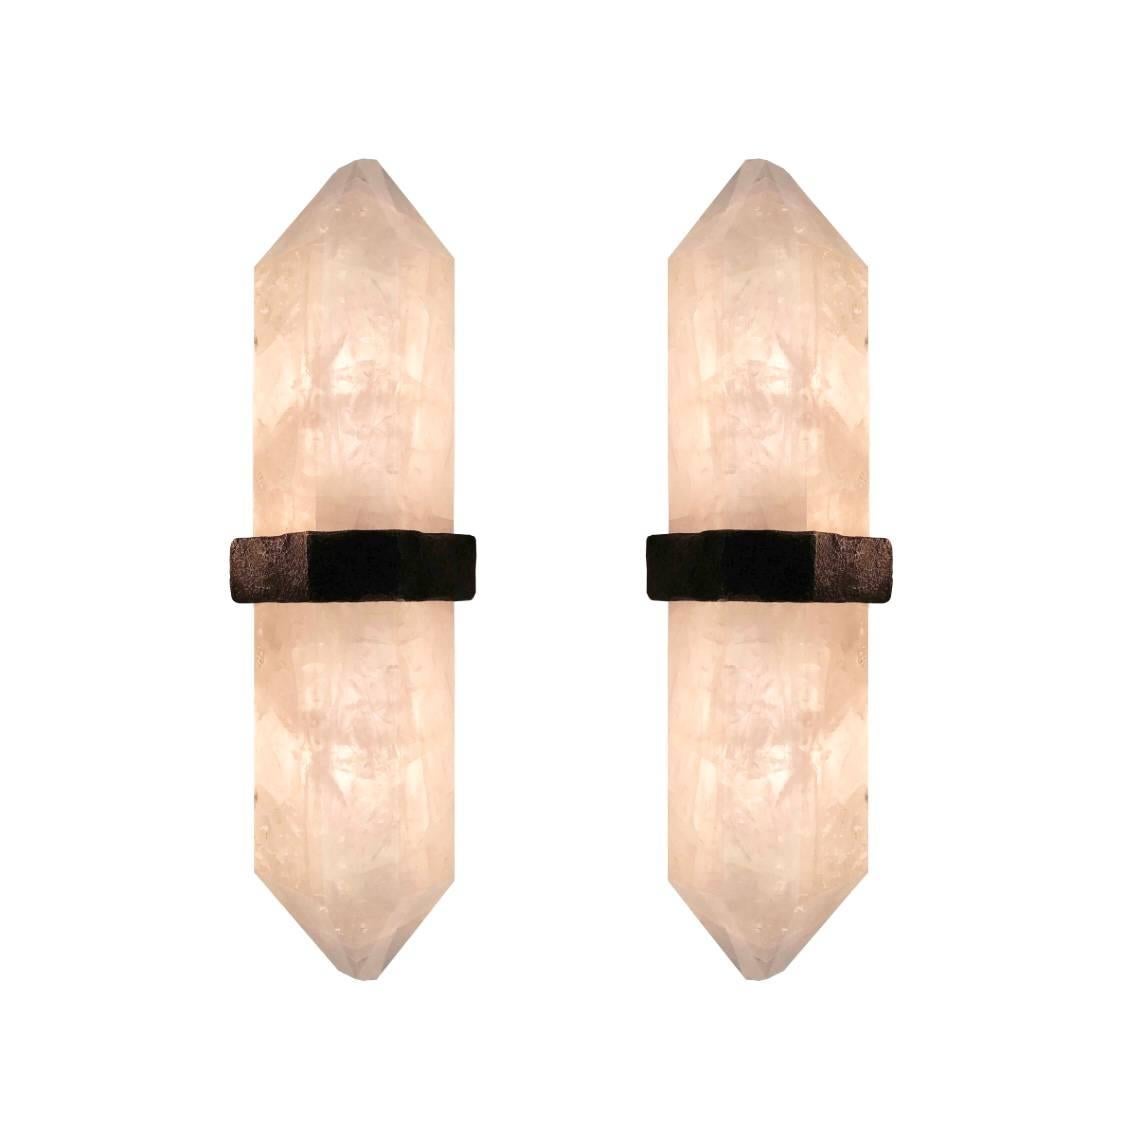 A carved diamond form smoky rock crystal quartz wall sconces, mount with rich texture of hammered antique brass decoration, created by Phoenix gallery NYC. Custom size available
Each sconces installed two sockets, and will including two LED light